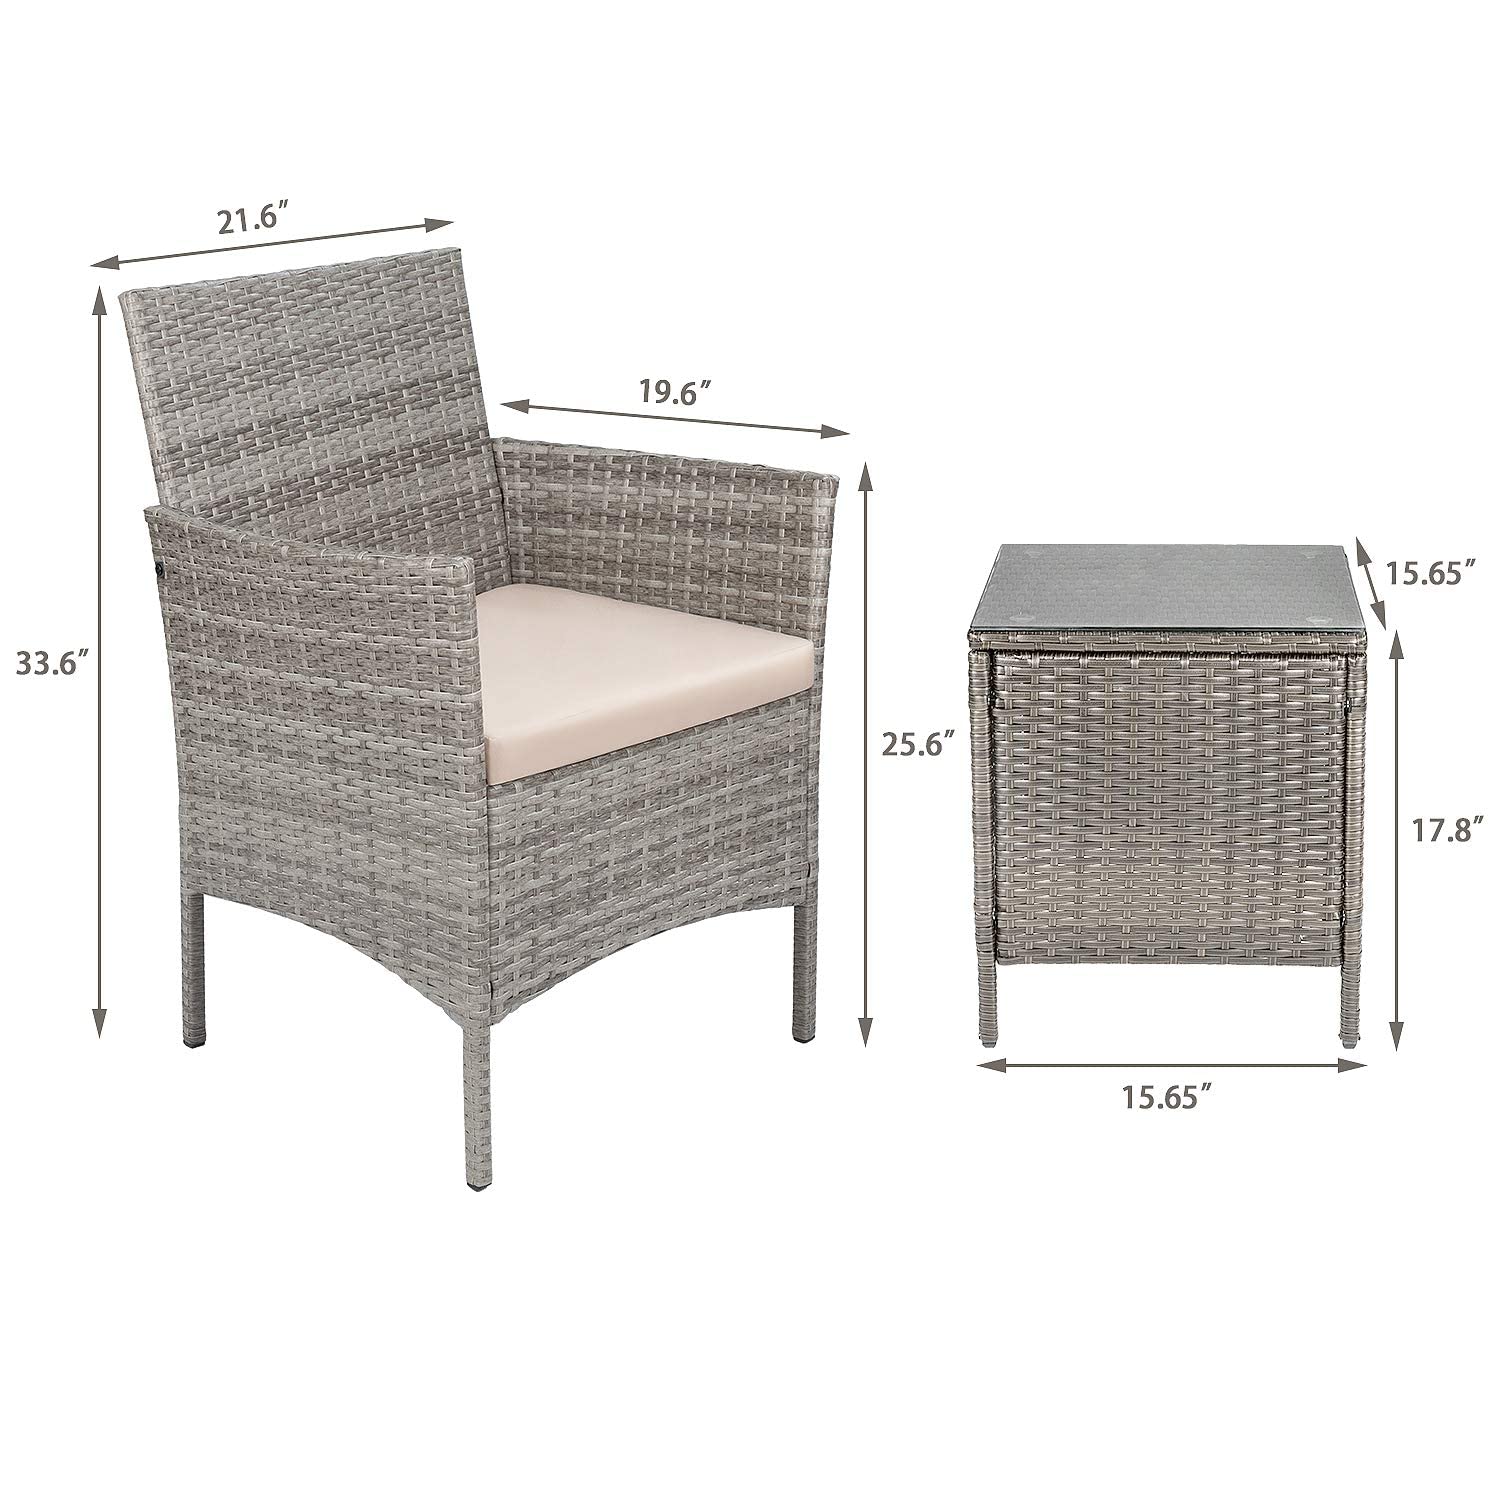 Tuoze 3 Pieces Furniture Rattan Outdoor Conversation Patio Set with Table Chairs Backyard Porch Decor, Grey